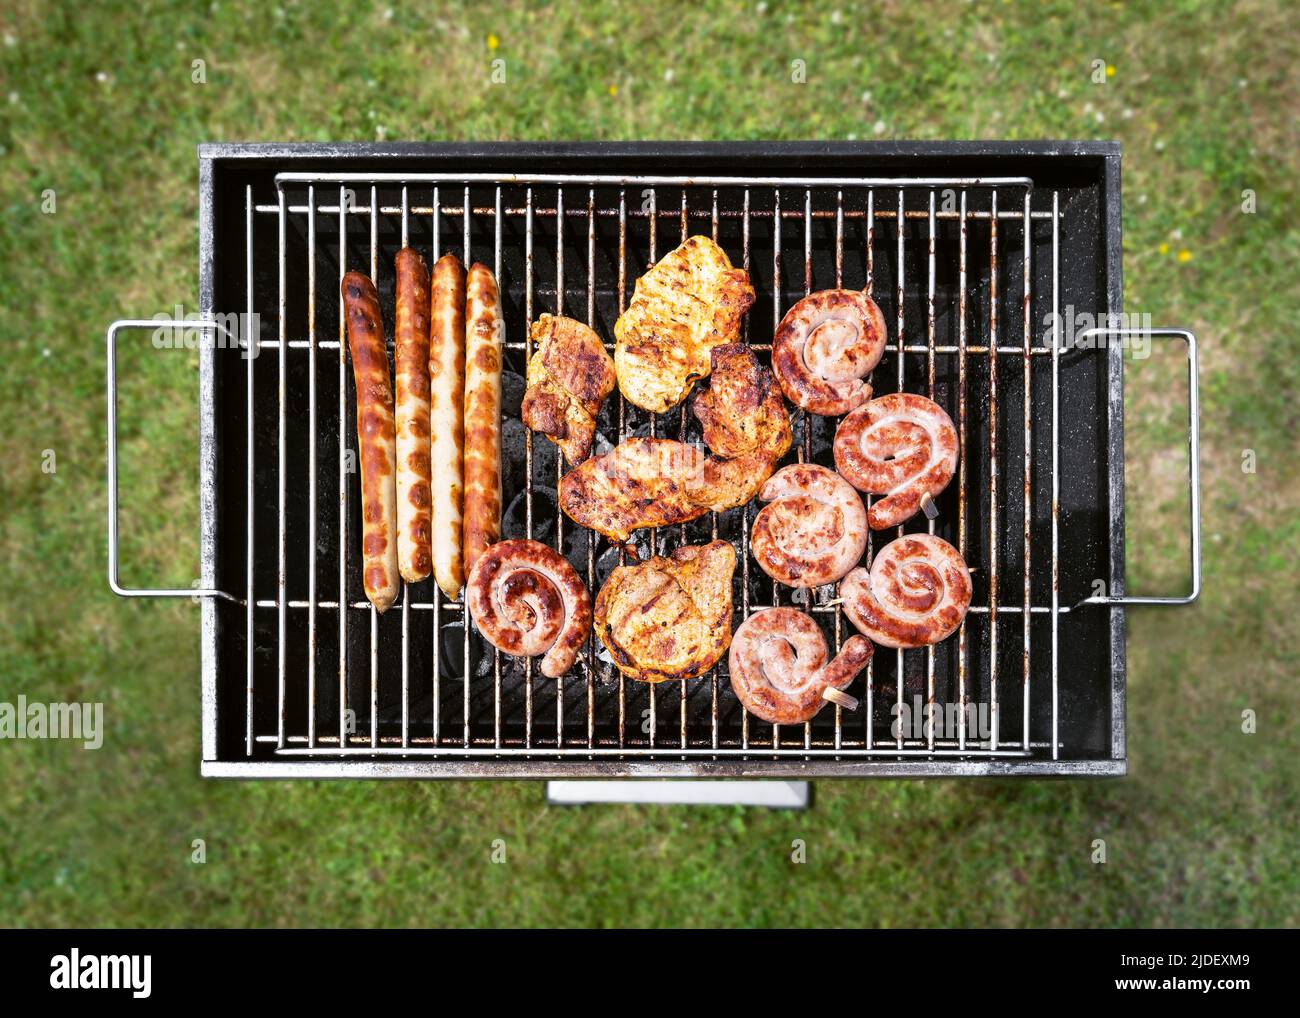 Tasty assortment of meat on a summer barbecue with steaks, chicken, sausages, spirals beef sausage. Overhead view over green grass. Stock Photo